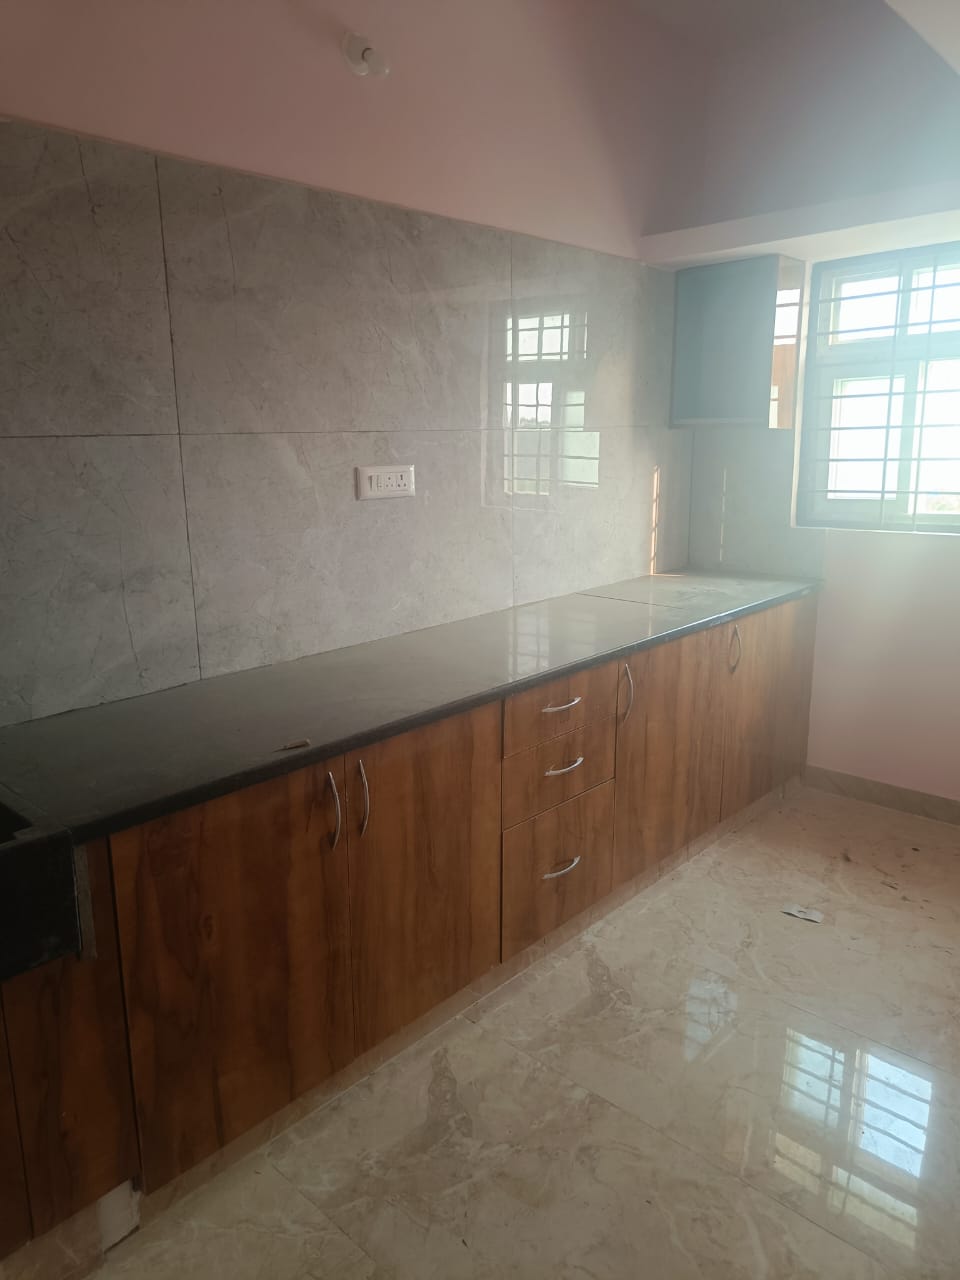 2 BHK Independent House for Lease Only at JAML2 - 2596 in Kempegowda Nagar